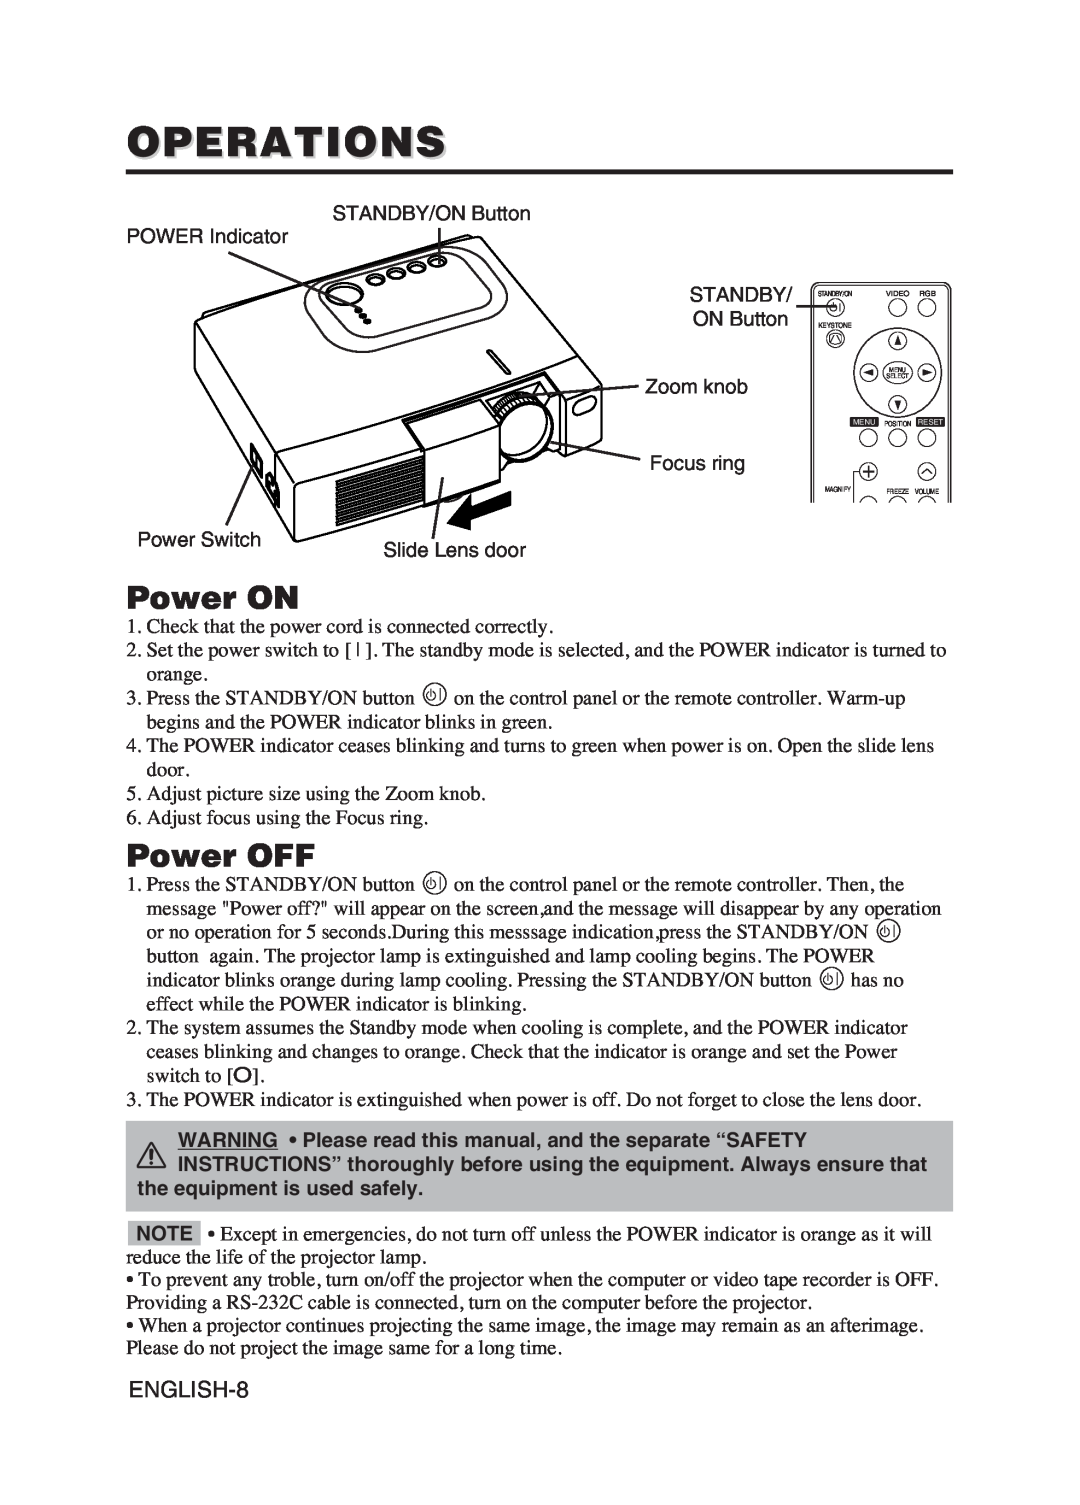 Hitachi CPS225W user manual Operations, Power ON, Power OFF, the equipment is used safely 